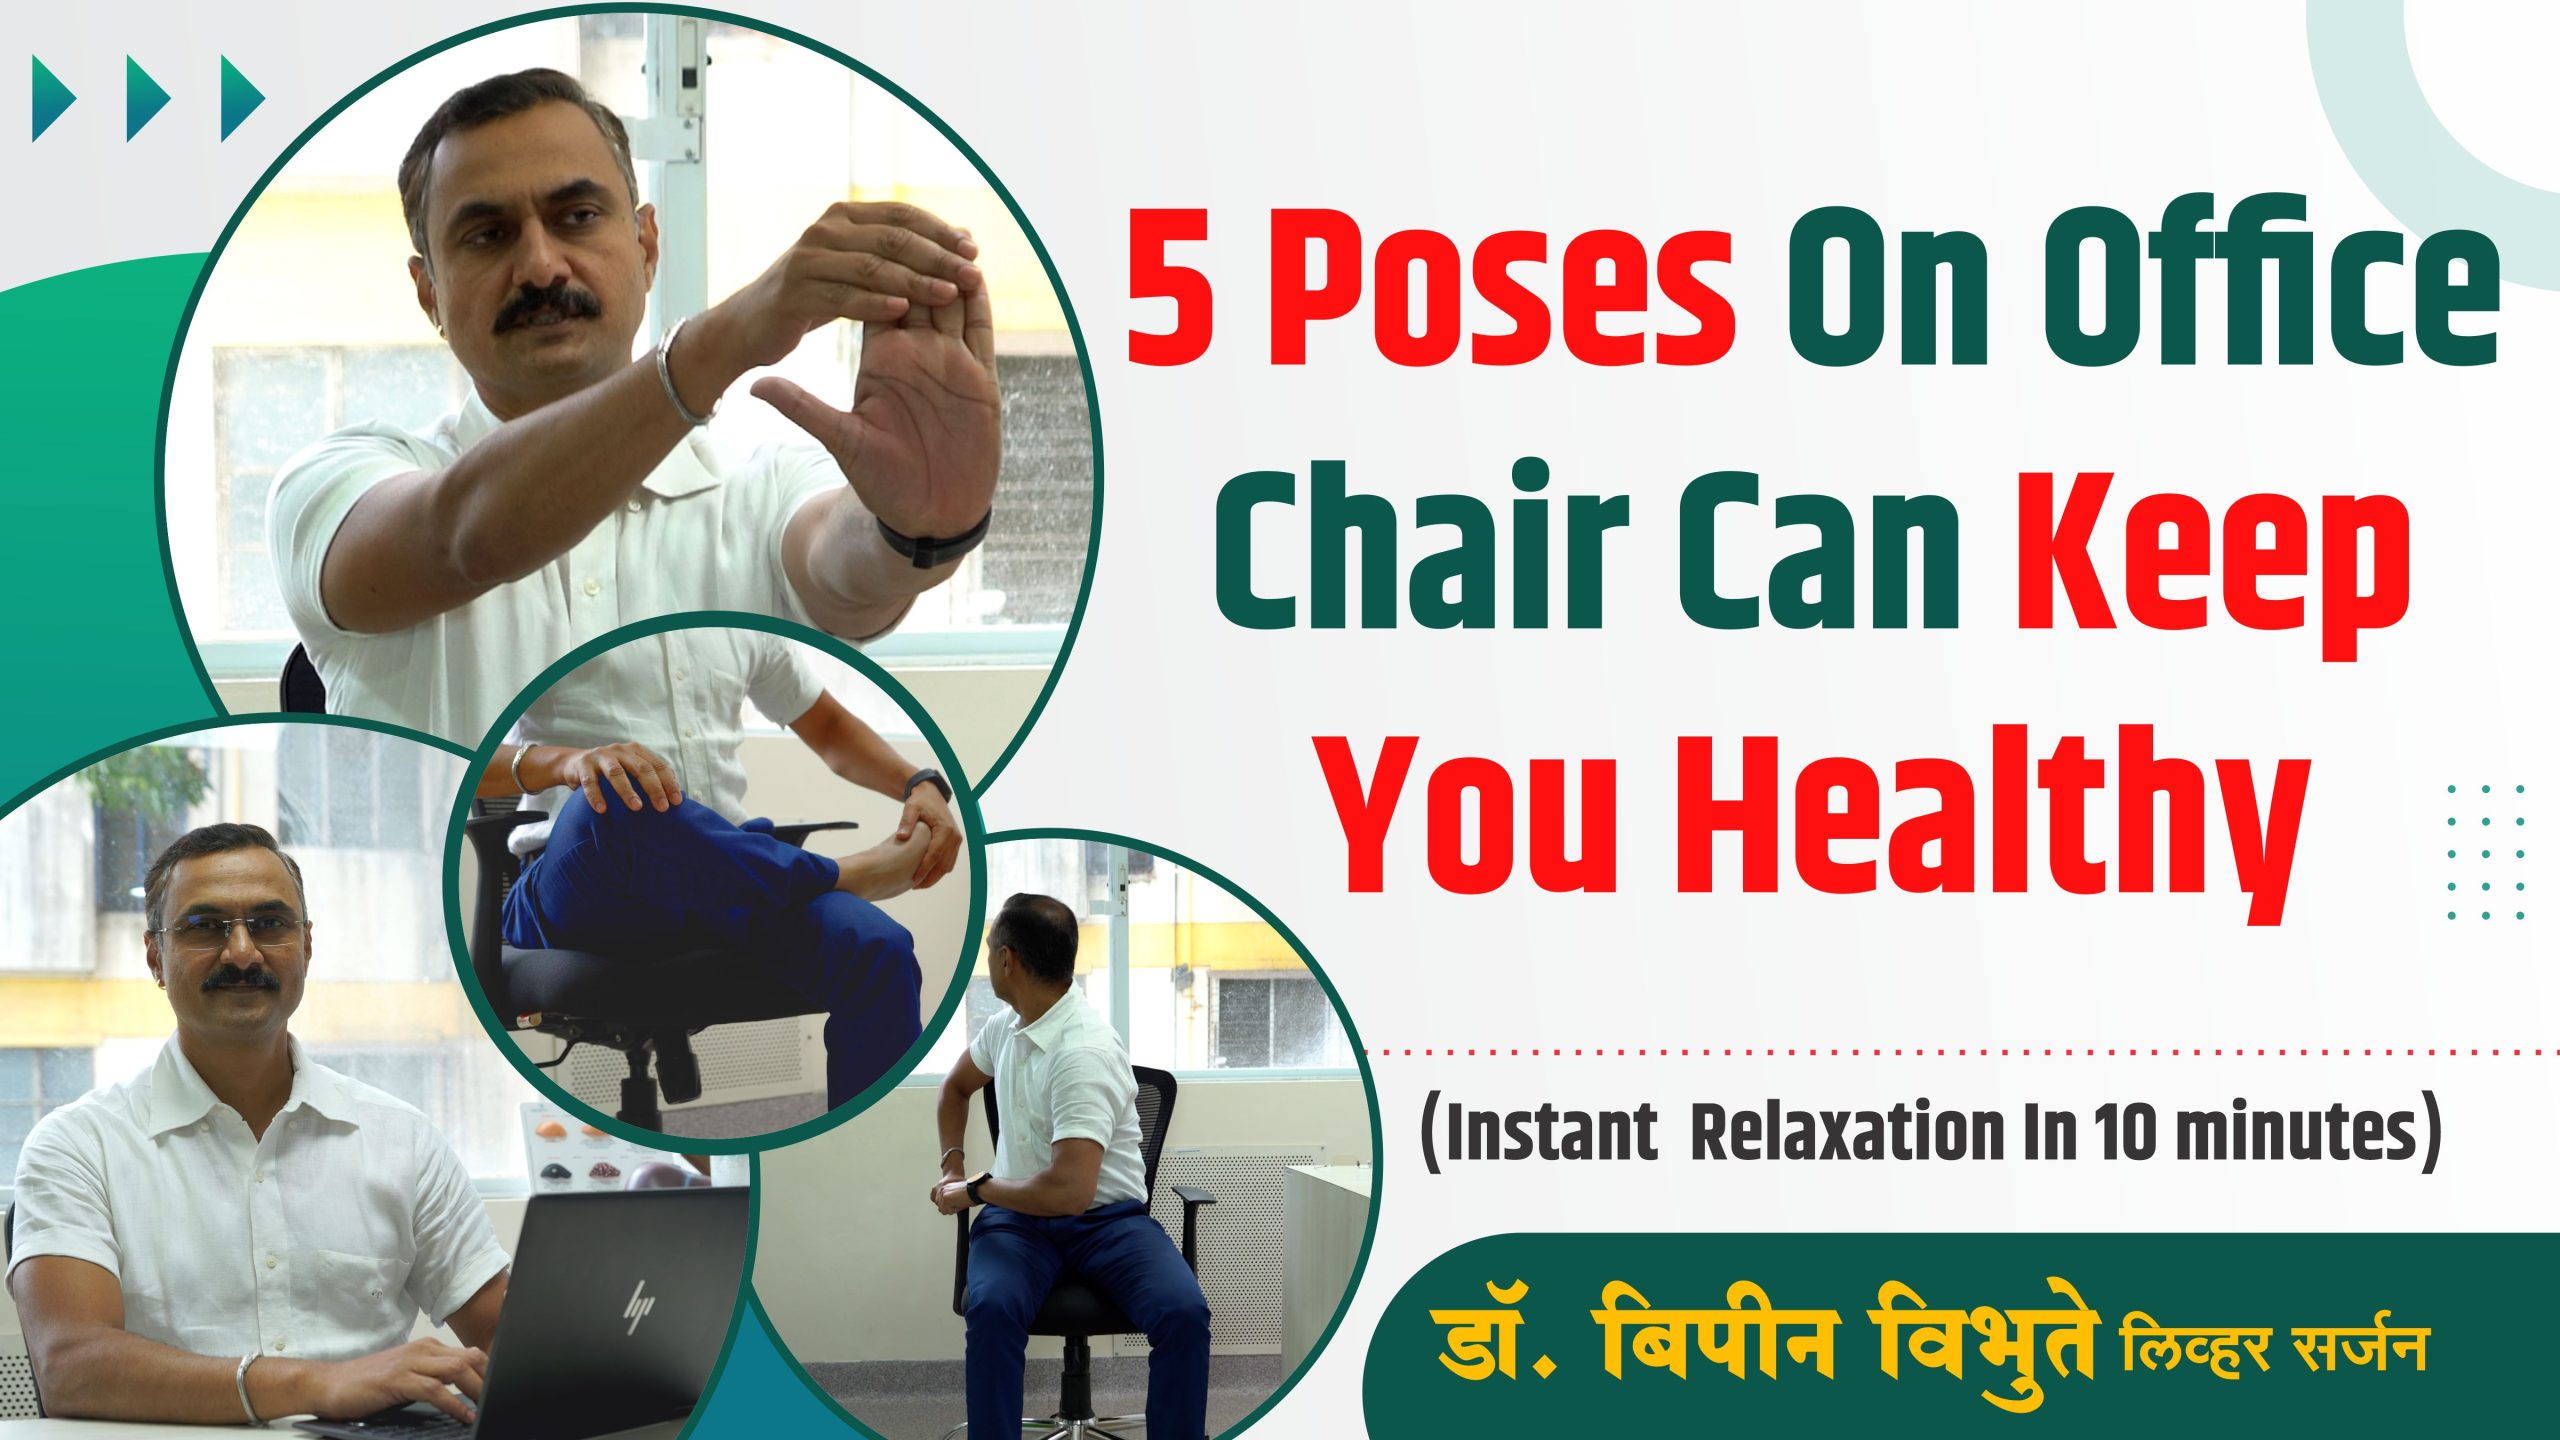 5 Poses on Office Chair can keep you Healthy